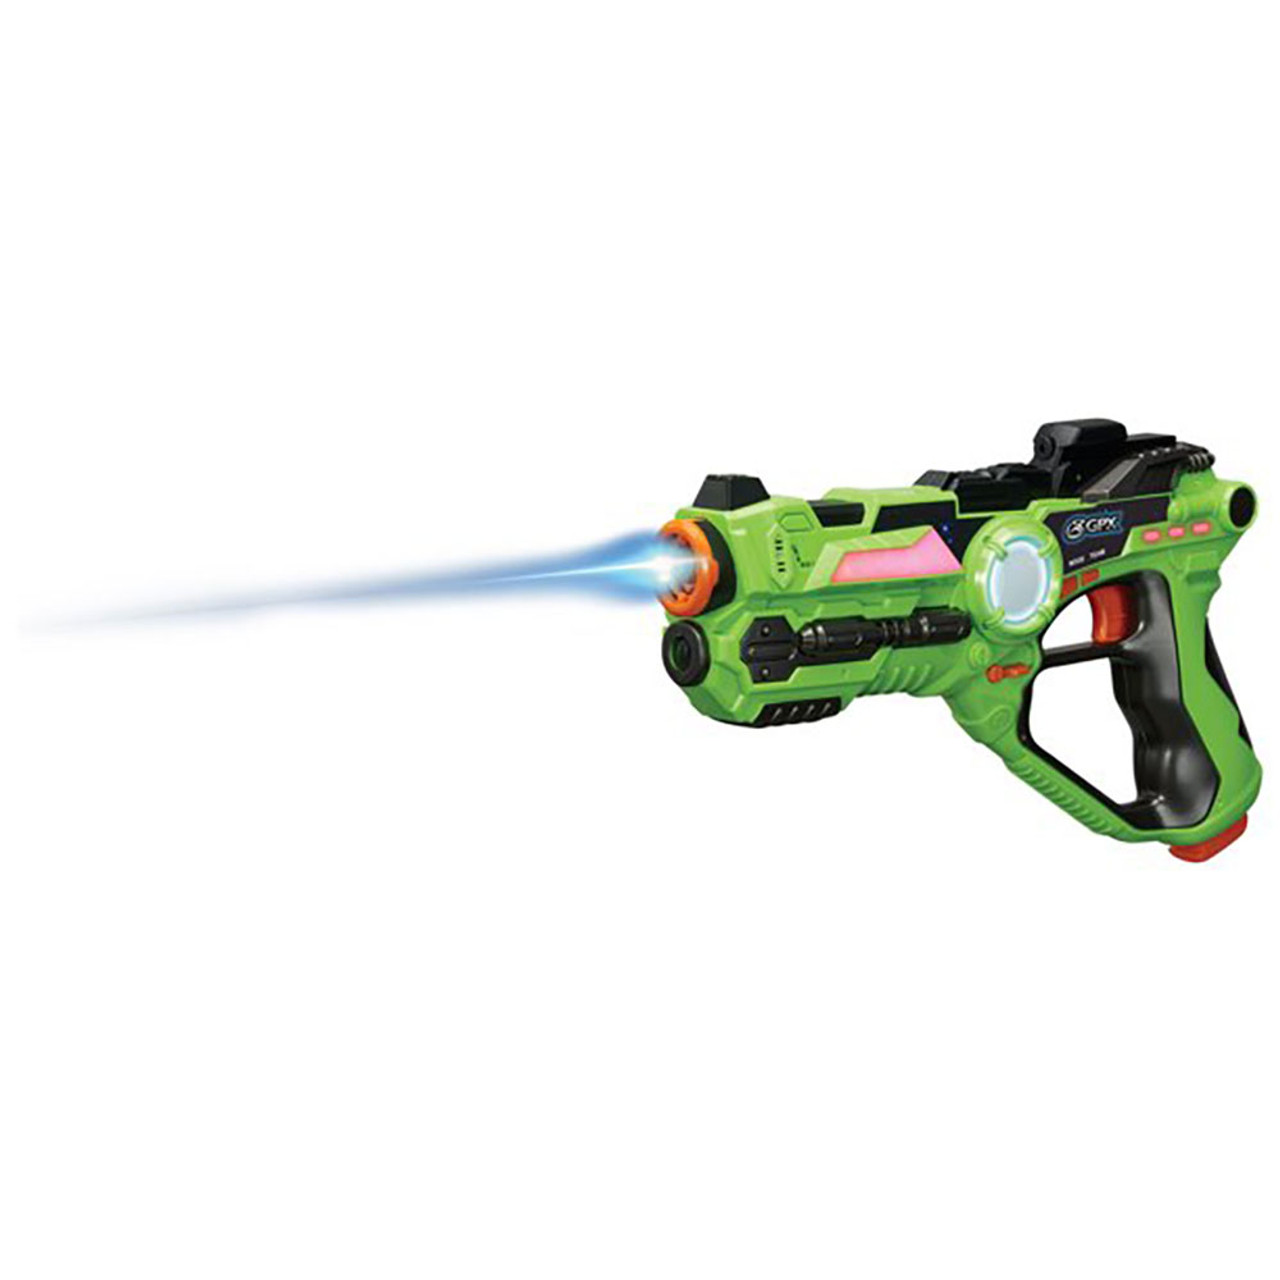 GPX® Laser Tag Blaster Toy Guns (Set of 2) product image